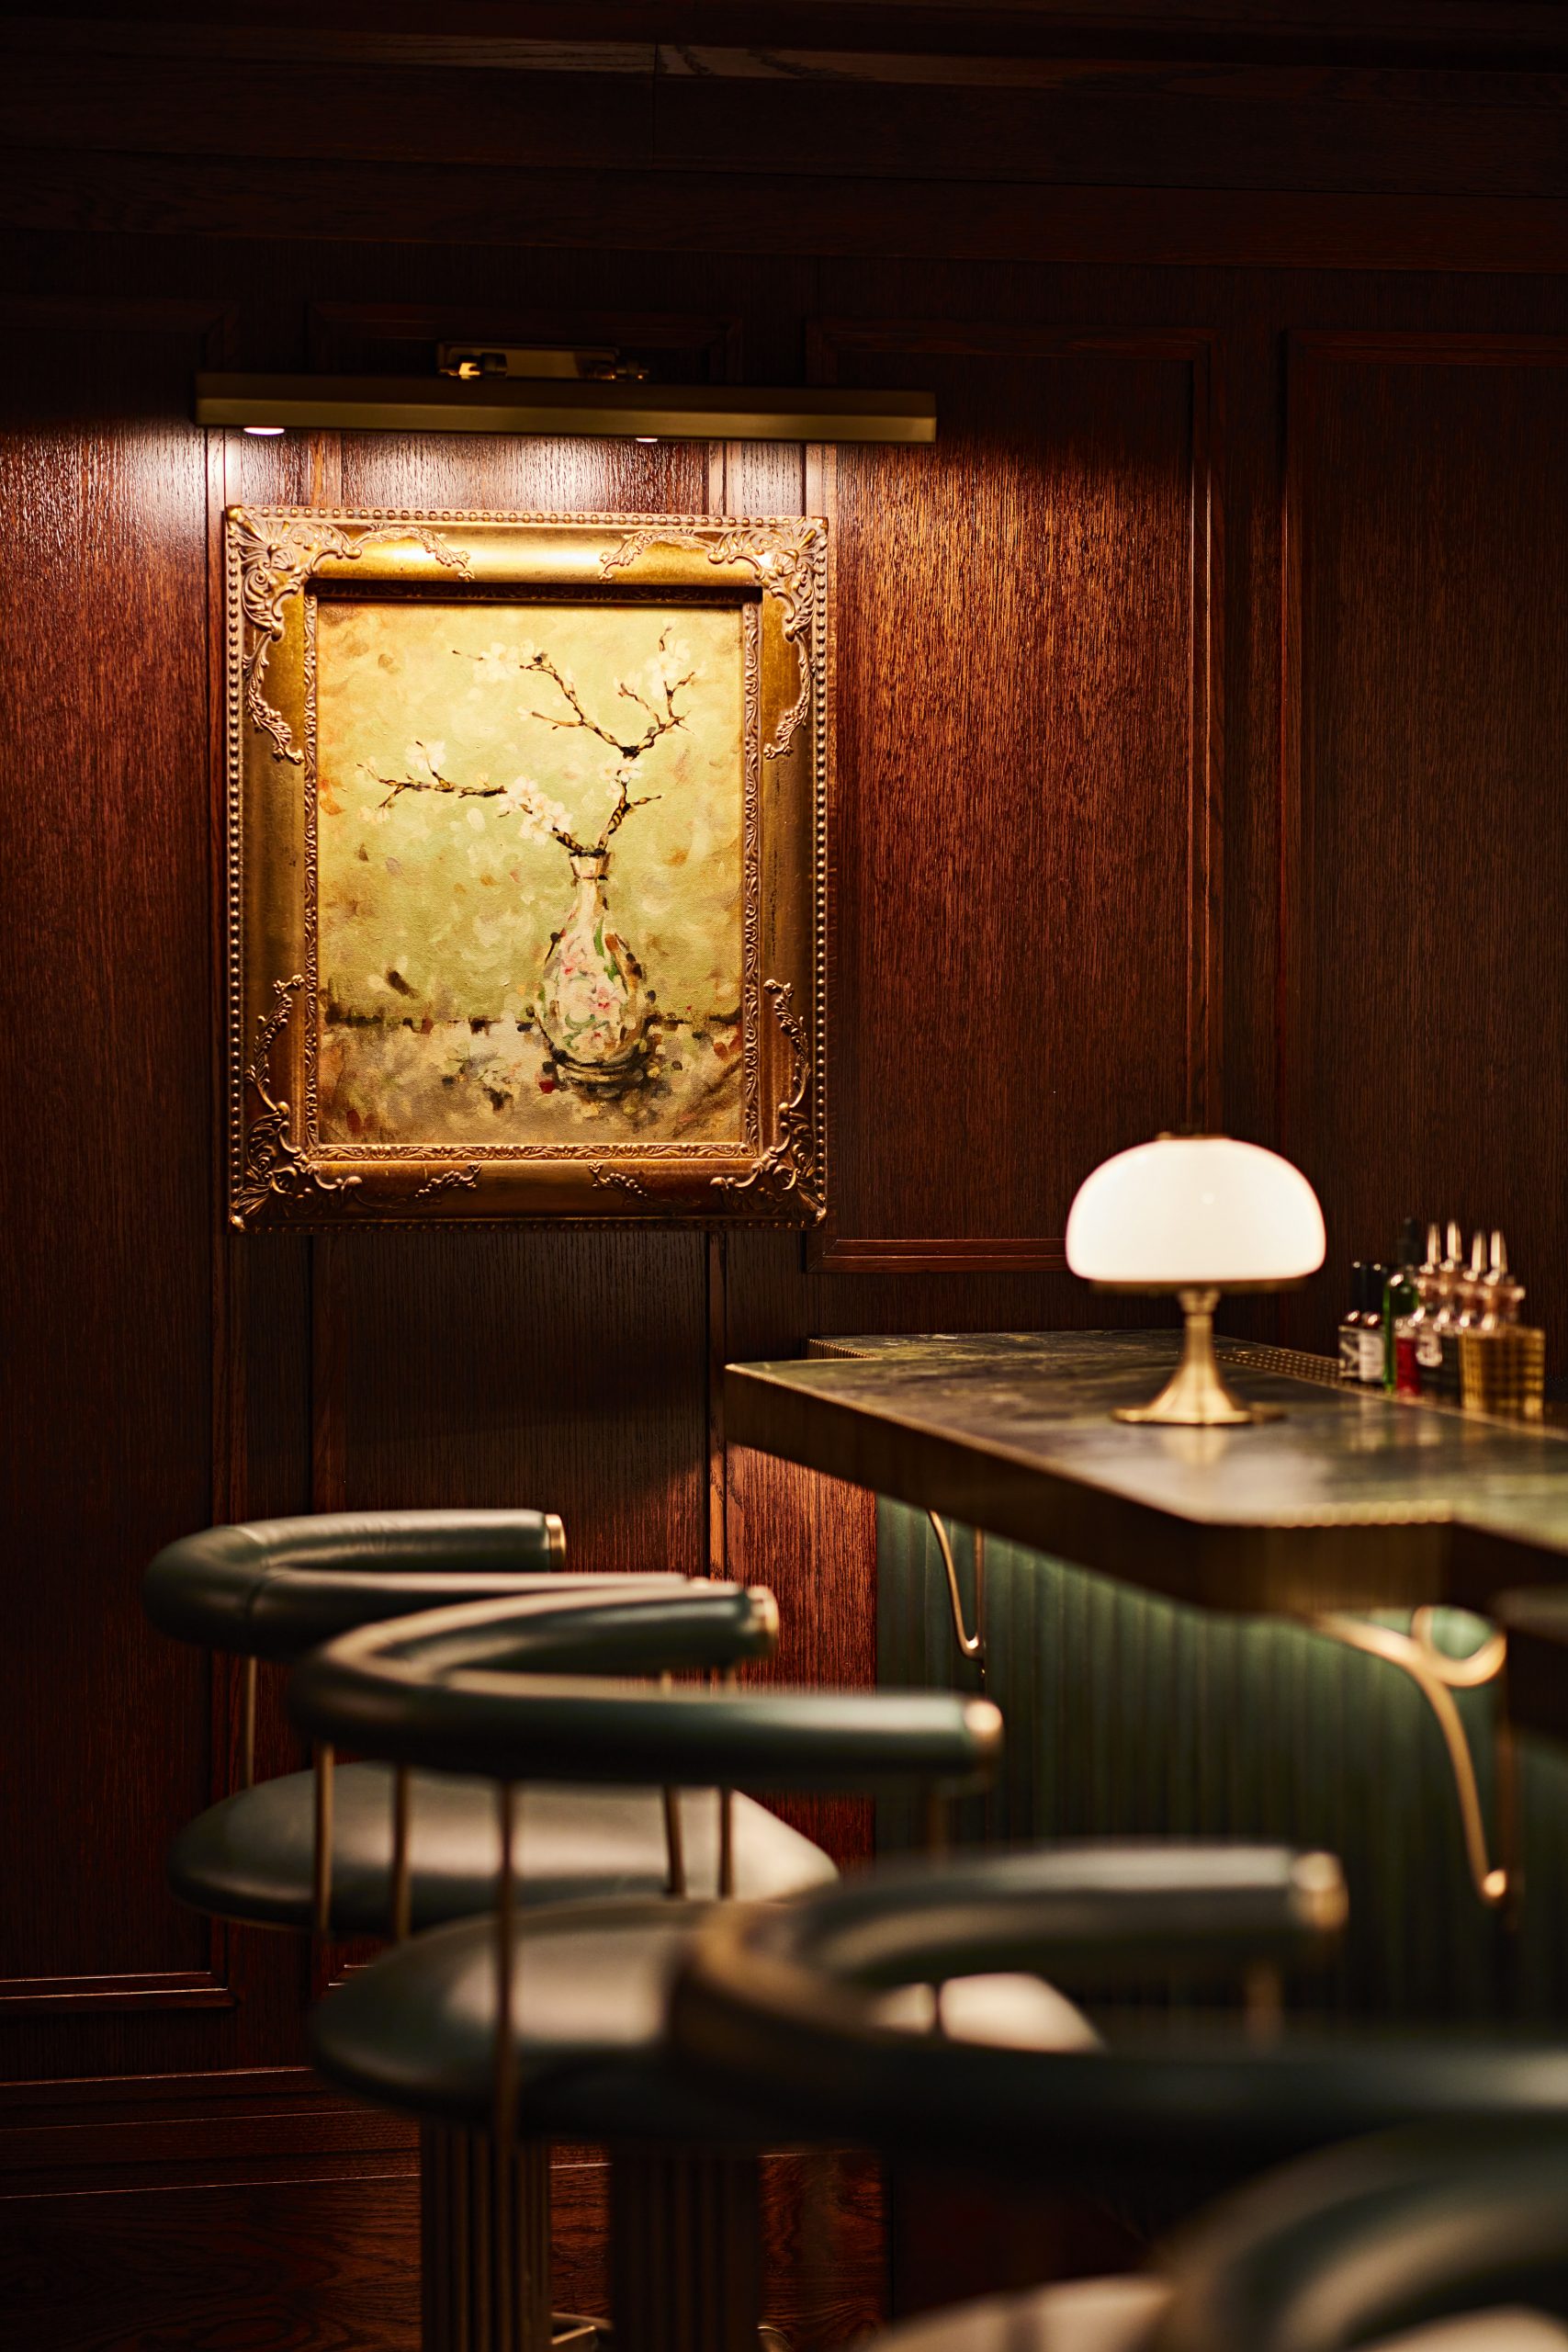 Intimate bar counter, opulent leather chairs, ornate framed artwork